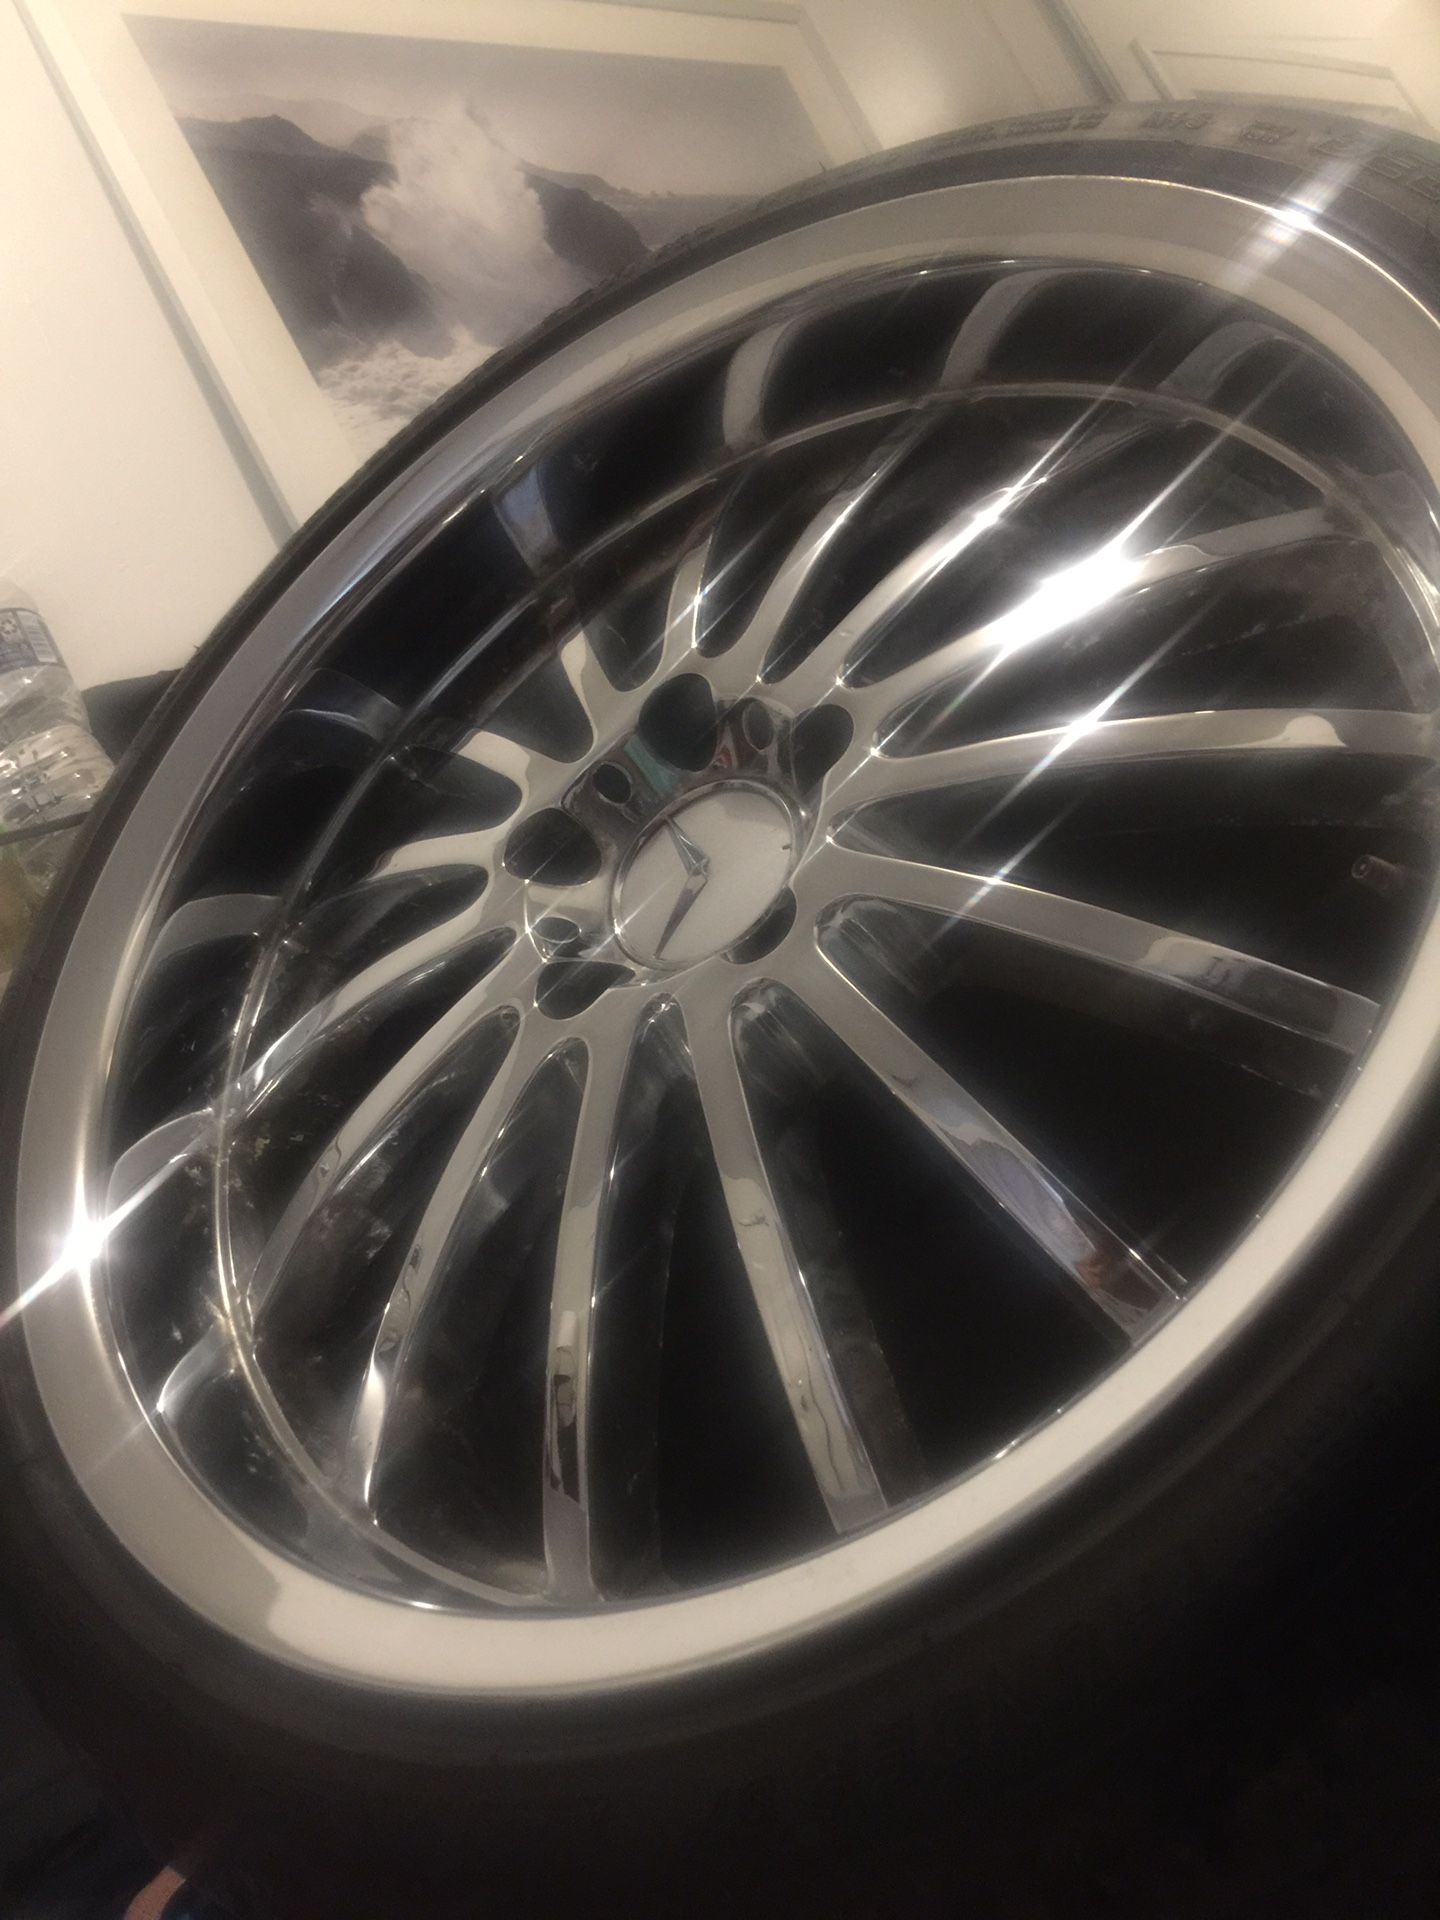 19 inch deep dish chrome rims and tires. Fit German cars and many others. Priced to sell